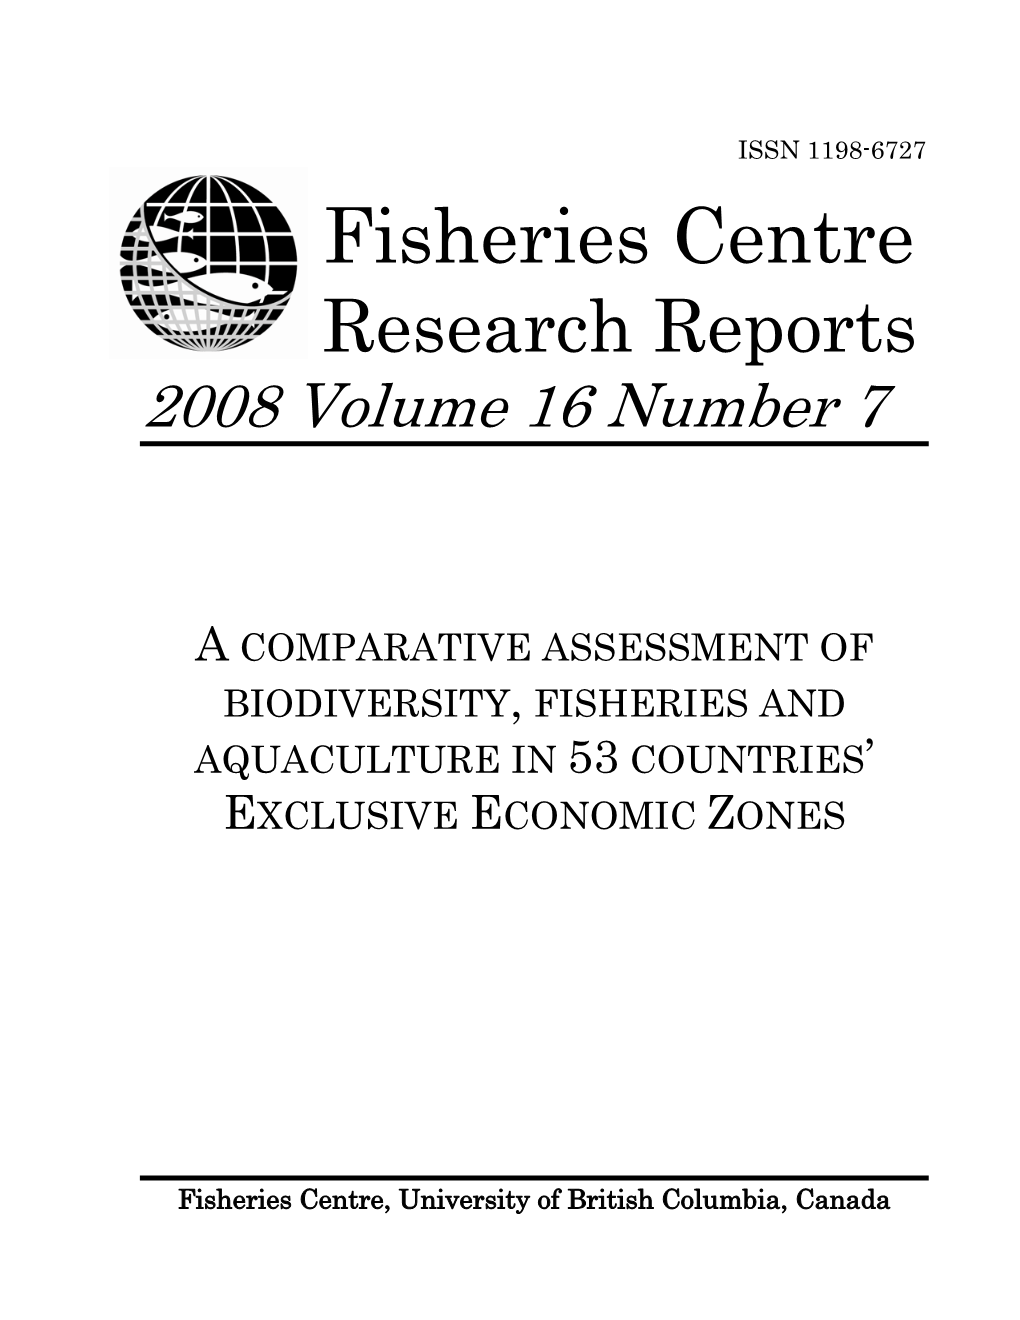 Pauly and Alder, 2005), and the Fishmeal Processing Factories Are a Source of Water and Air Pollution to the Communities (Campbell and Alder, 2006)